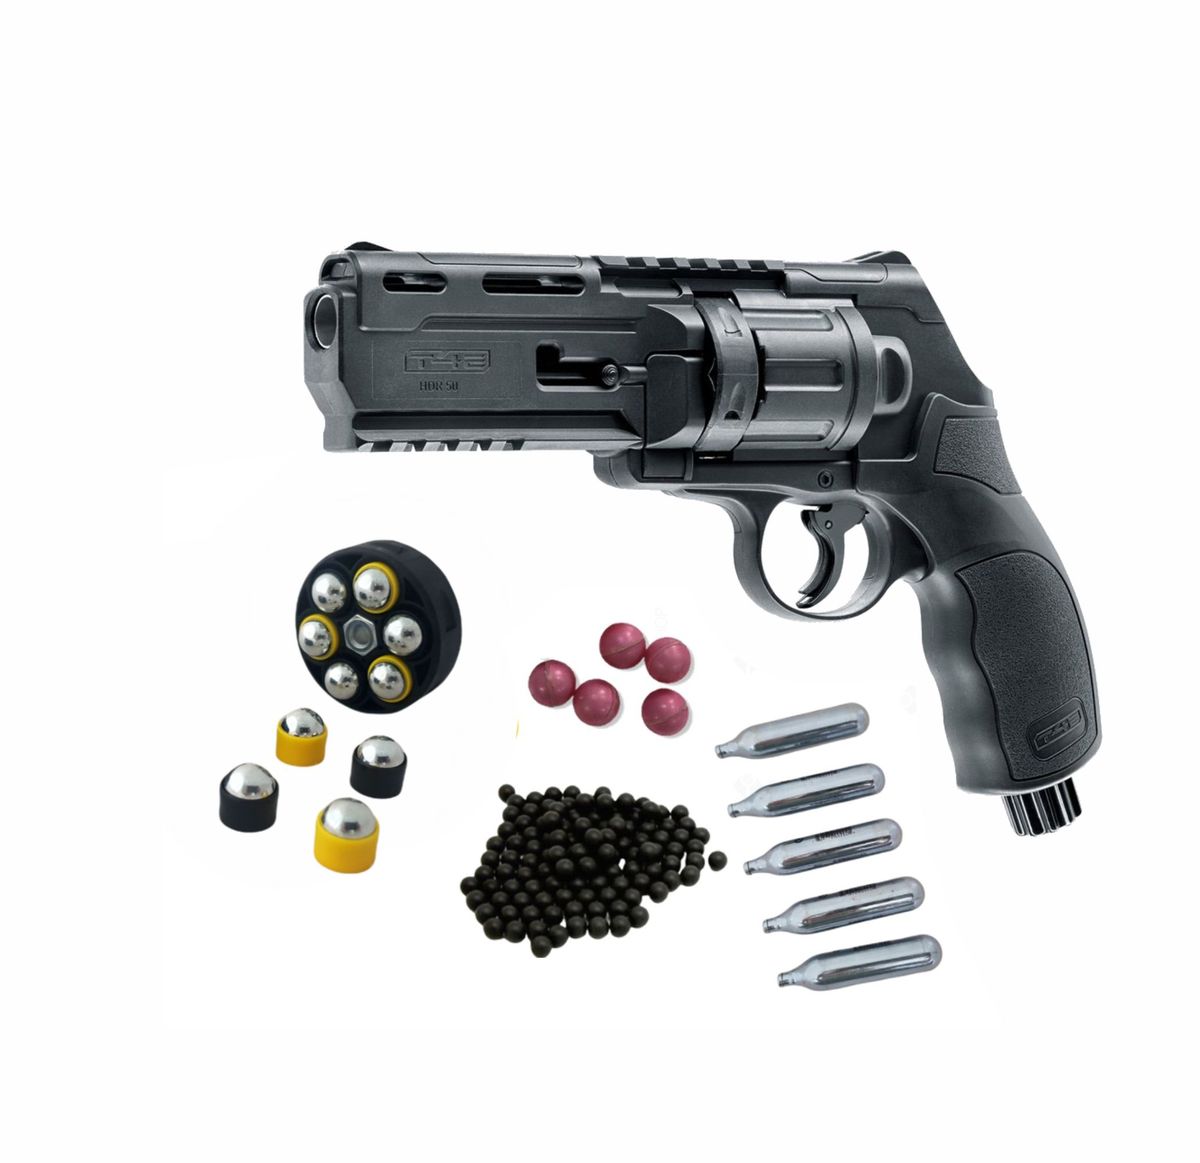 Umarex HDR50 CO2 Revolver Kit, Shop Today. Get it Tomorrow!